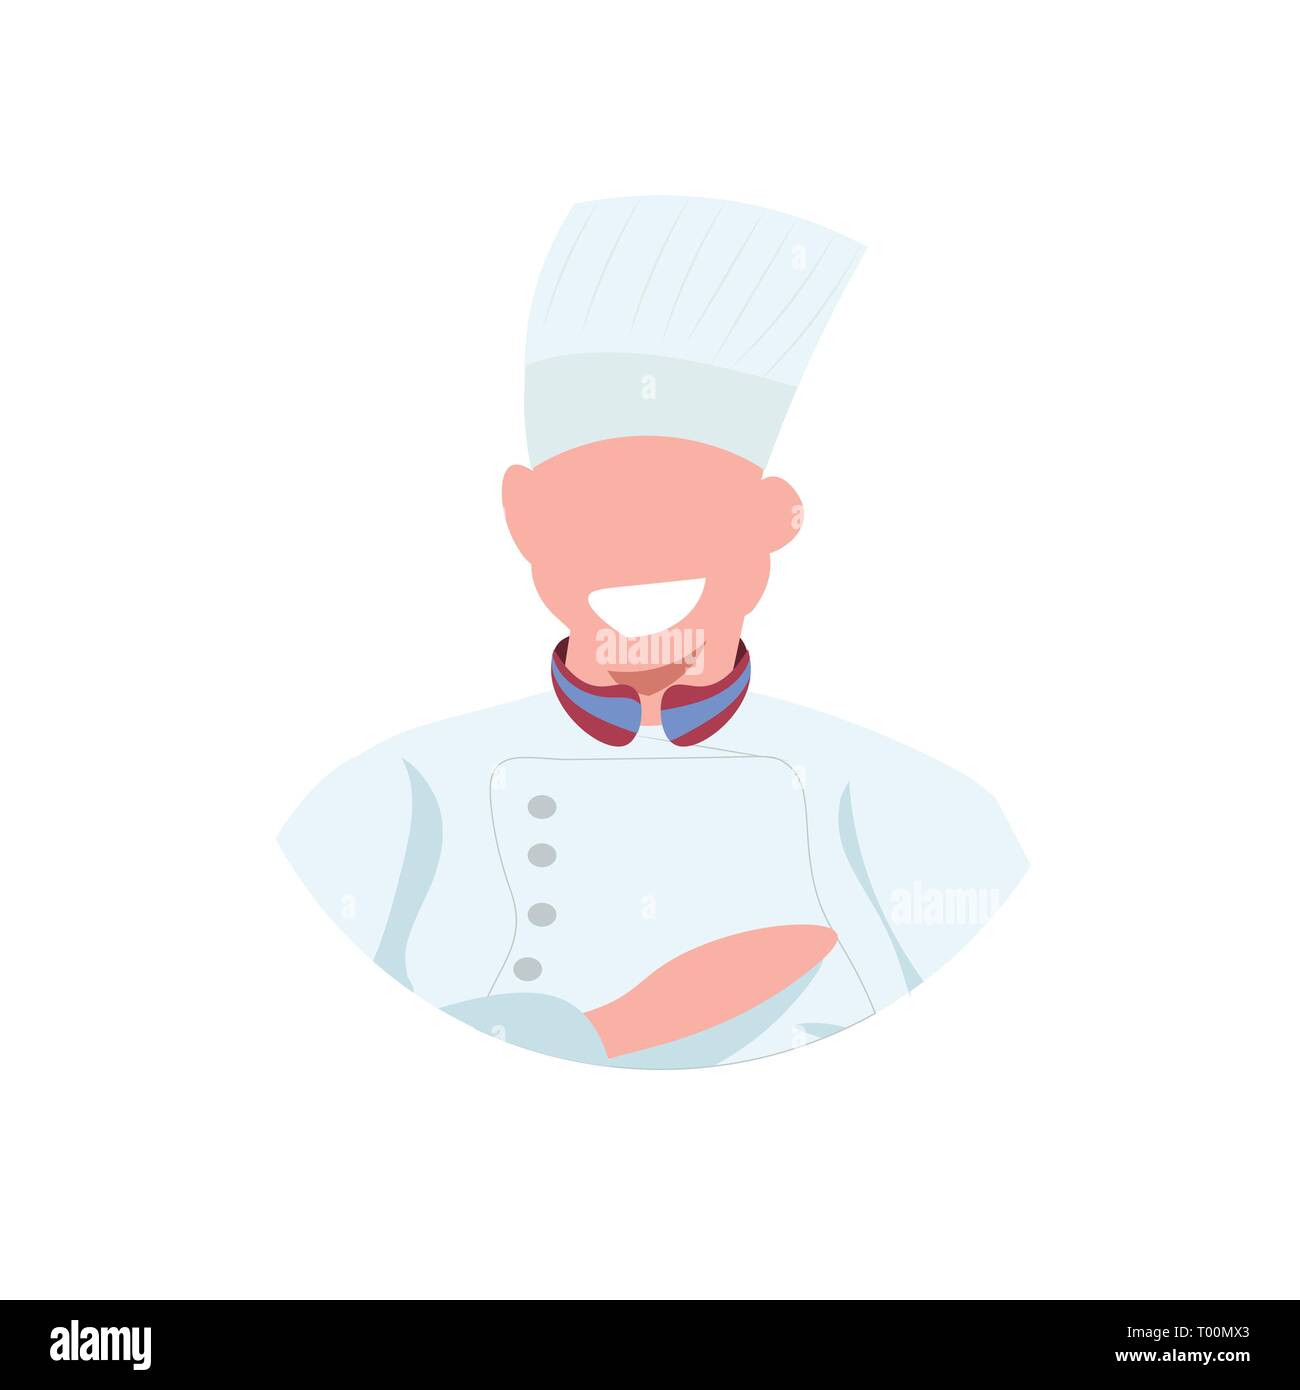 Male Cook Chef Face Avatar Man In Uniform Food Cooking Professional Occupation Concept 